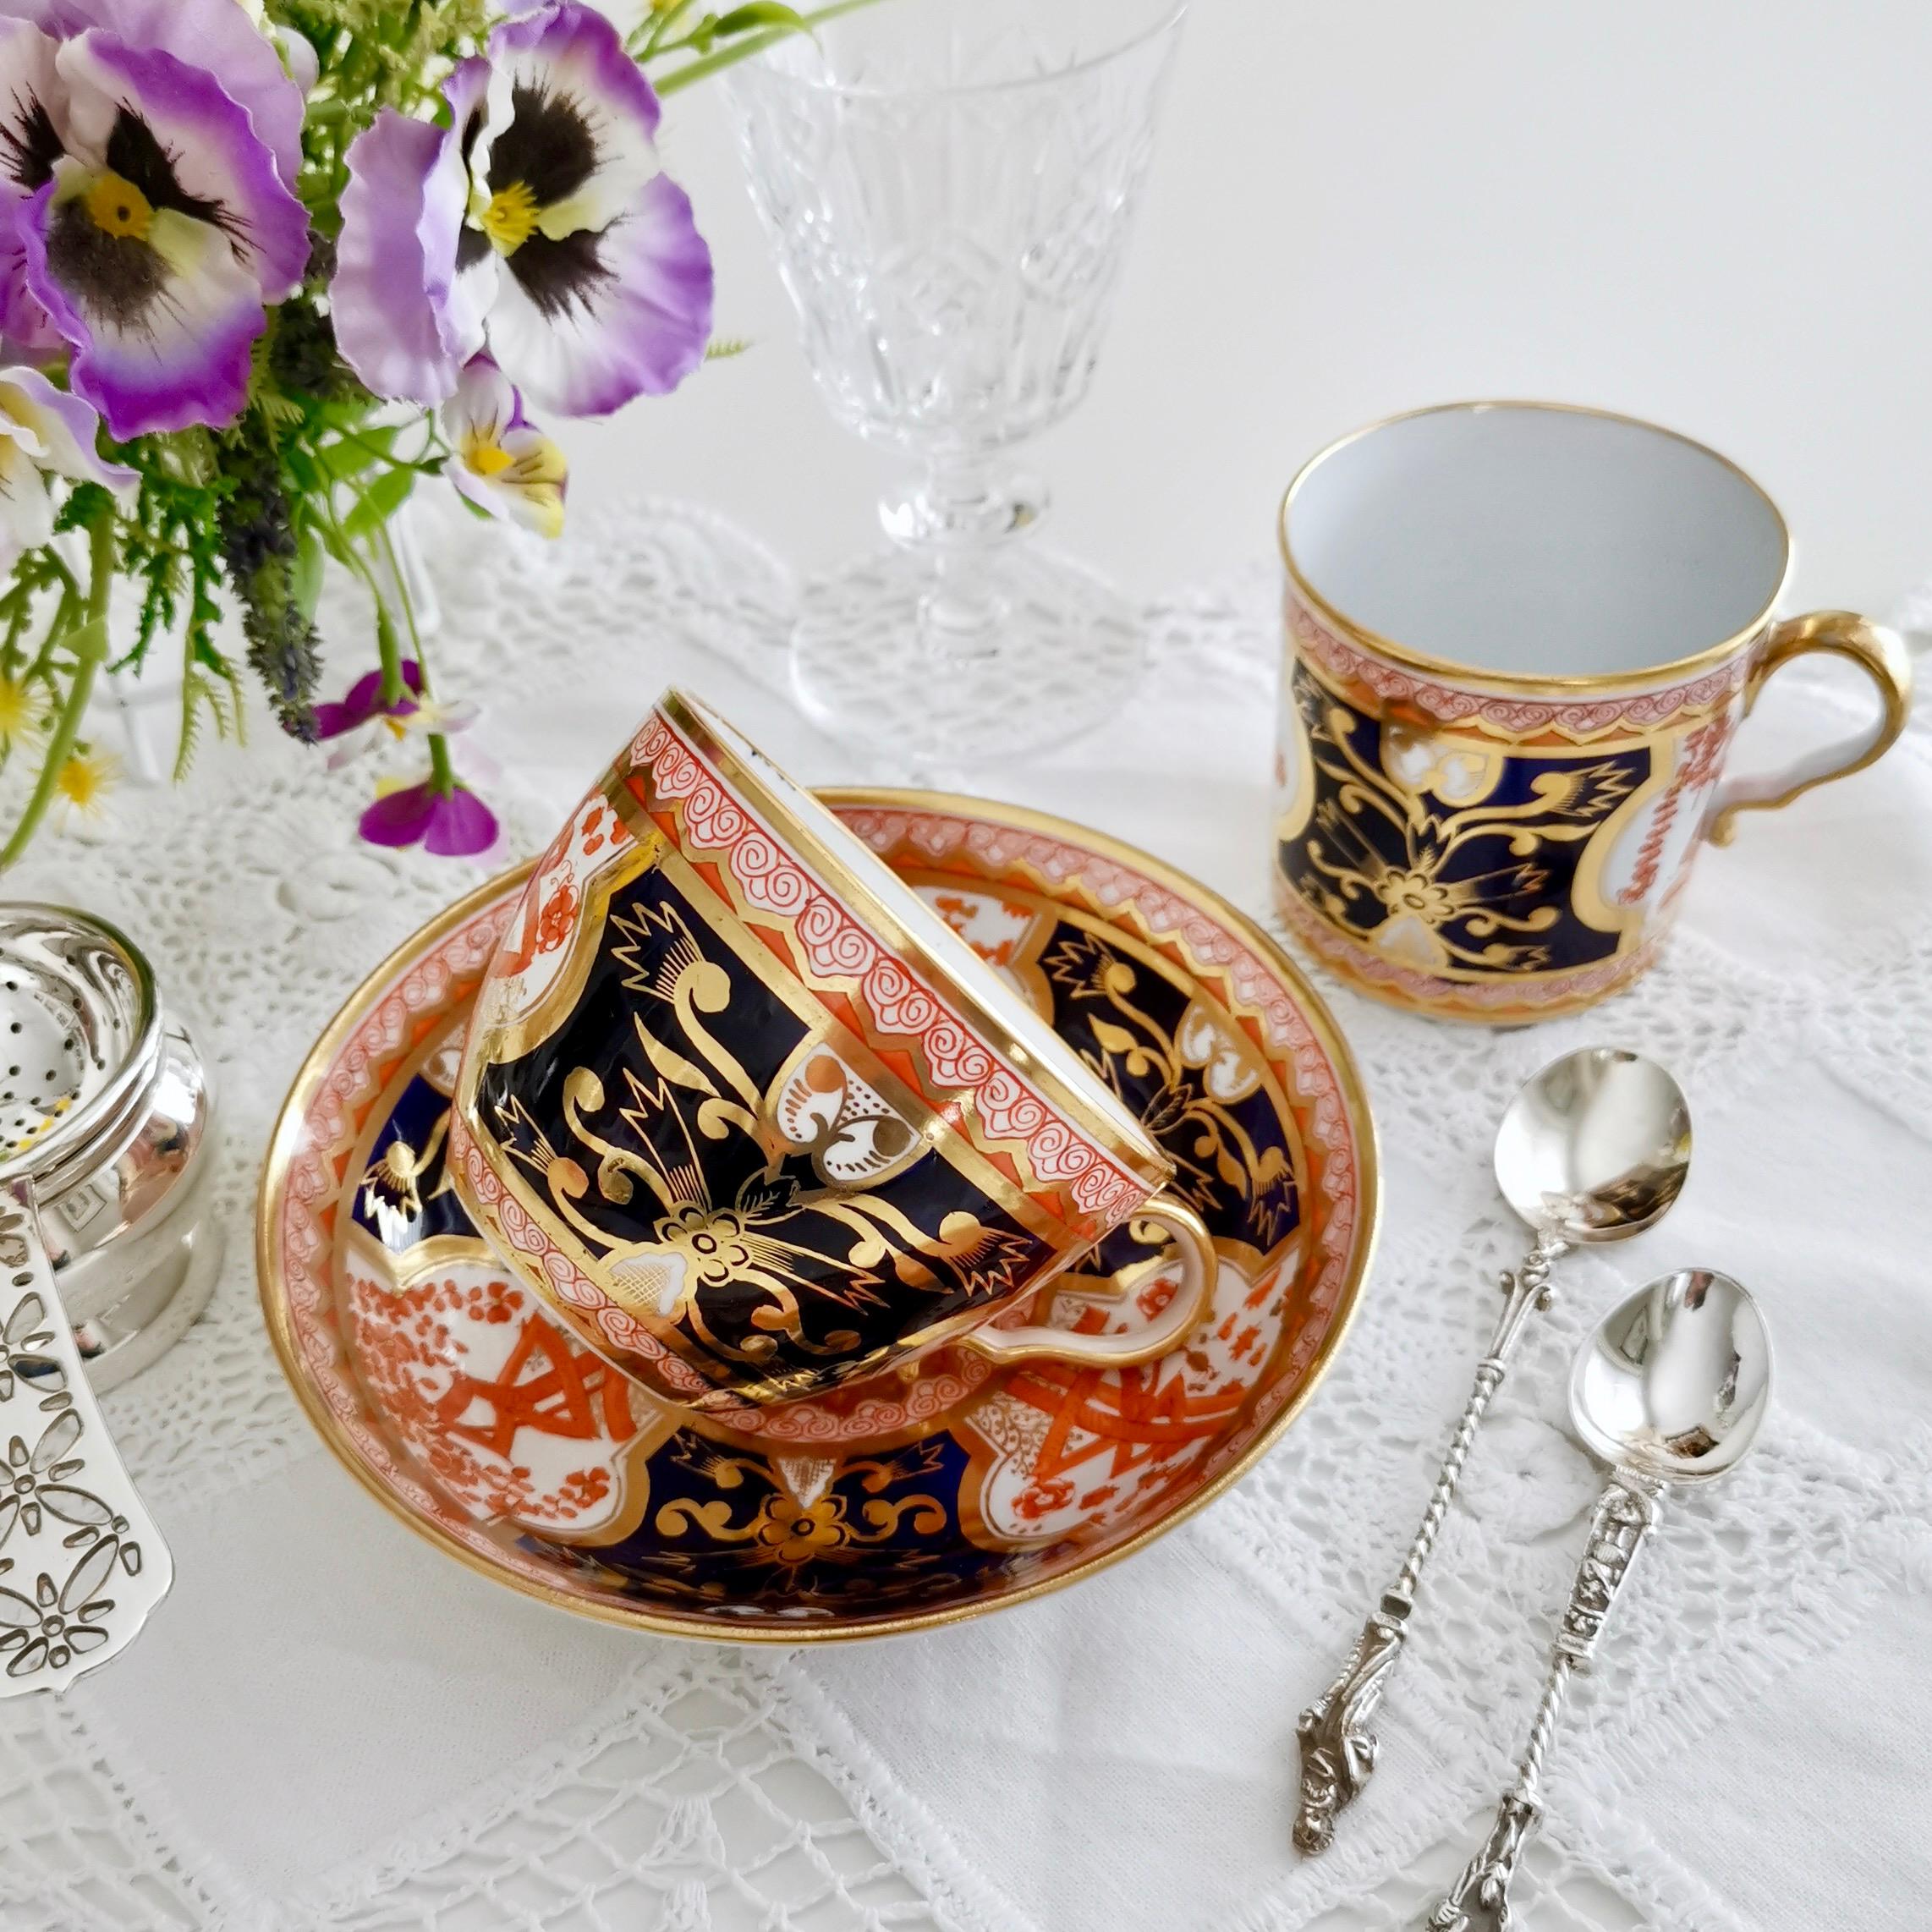 This is a beautiful orphaned teacup made by Spode in about 1810. It bears a beautiful Japanese-inspired Imari pattern.

Spode was the great pioneer among the Georgian potters in England. Around the year 1800 he perfected the bone china recipe that